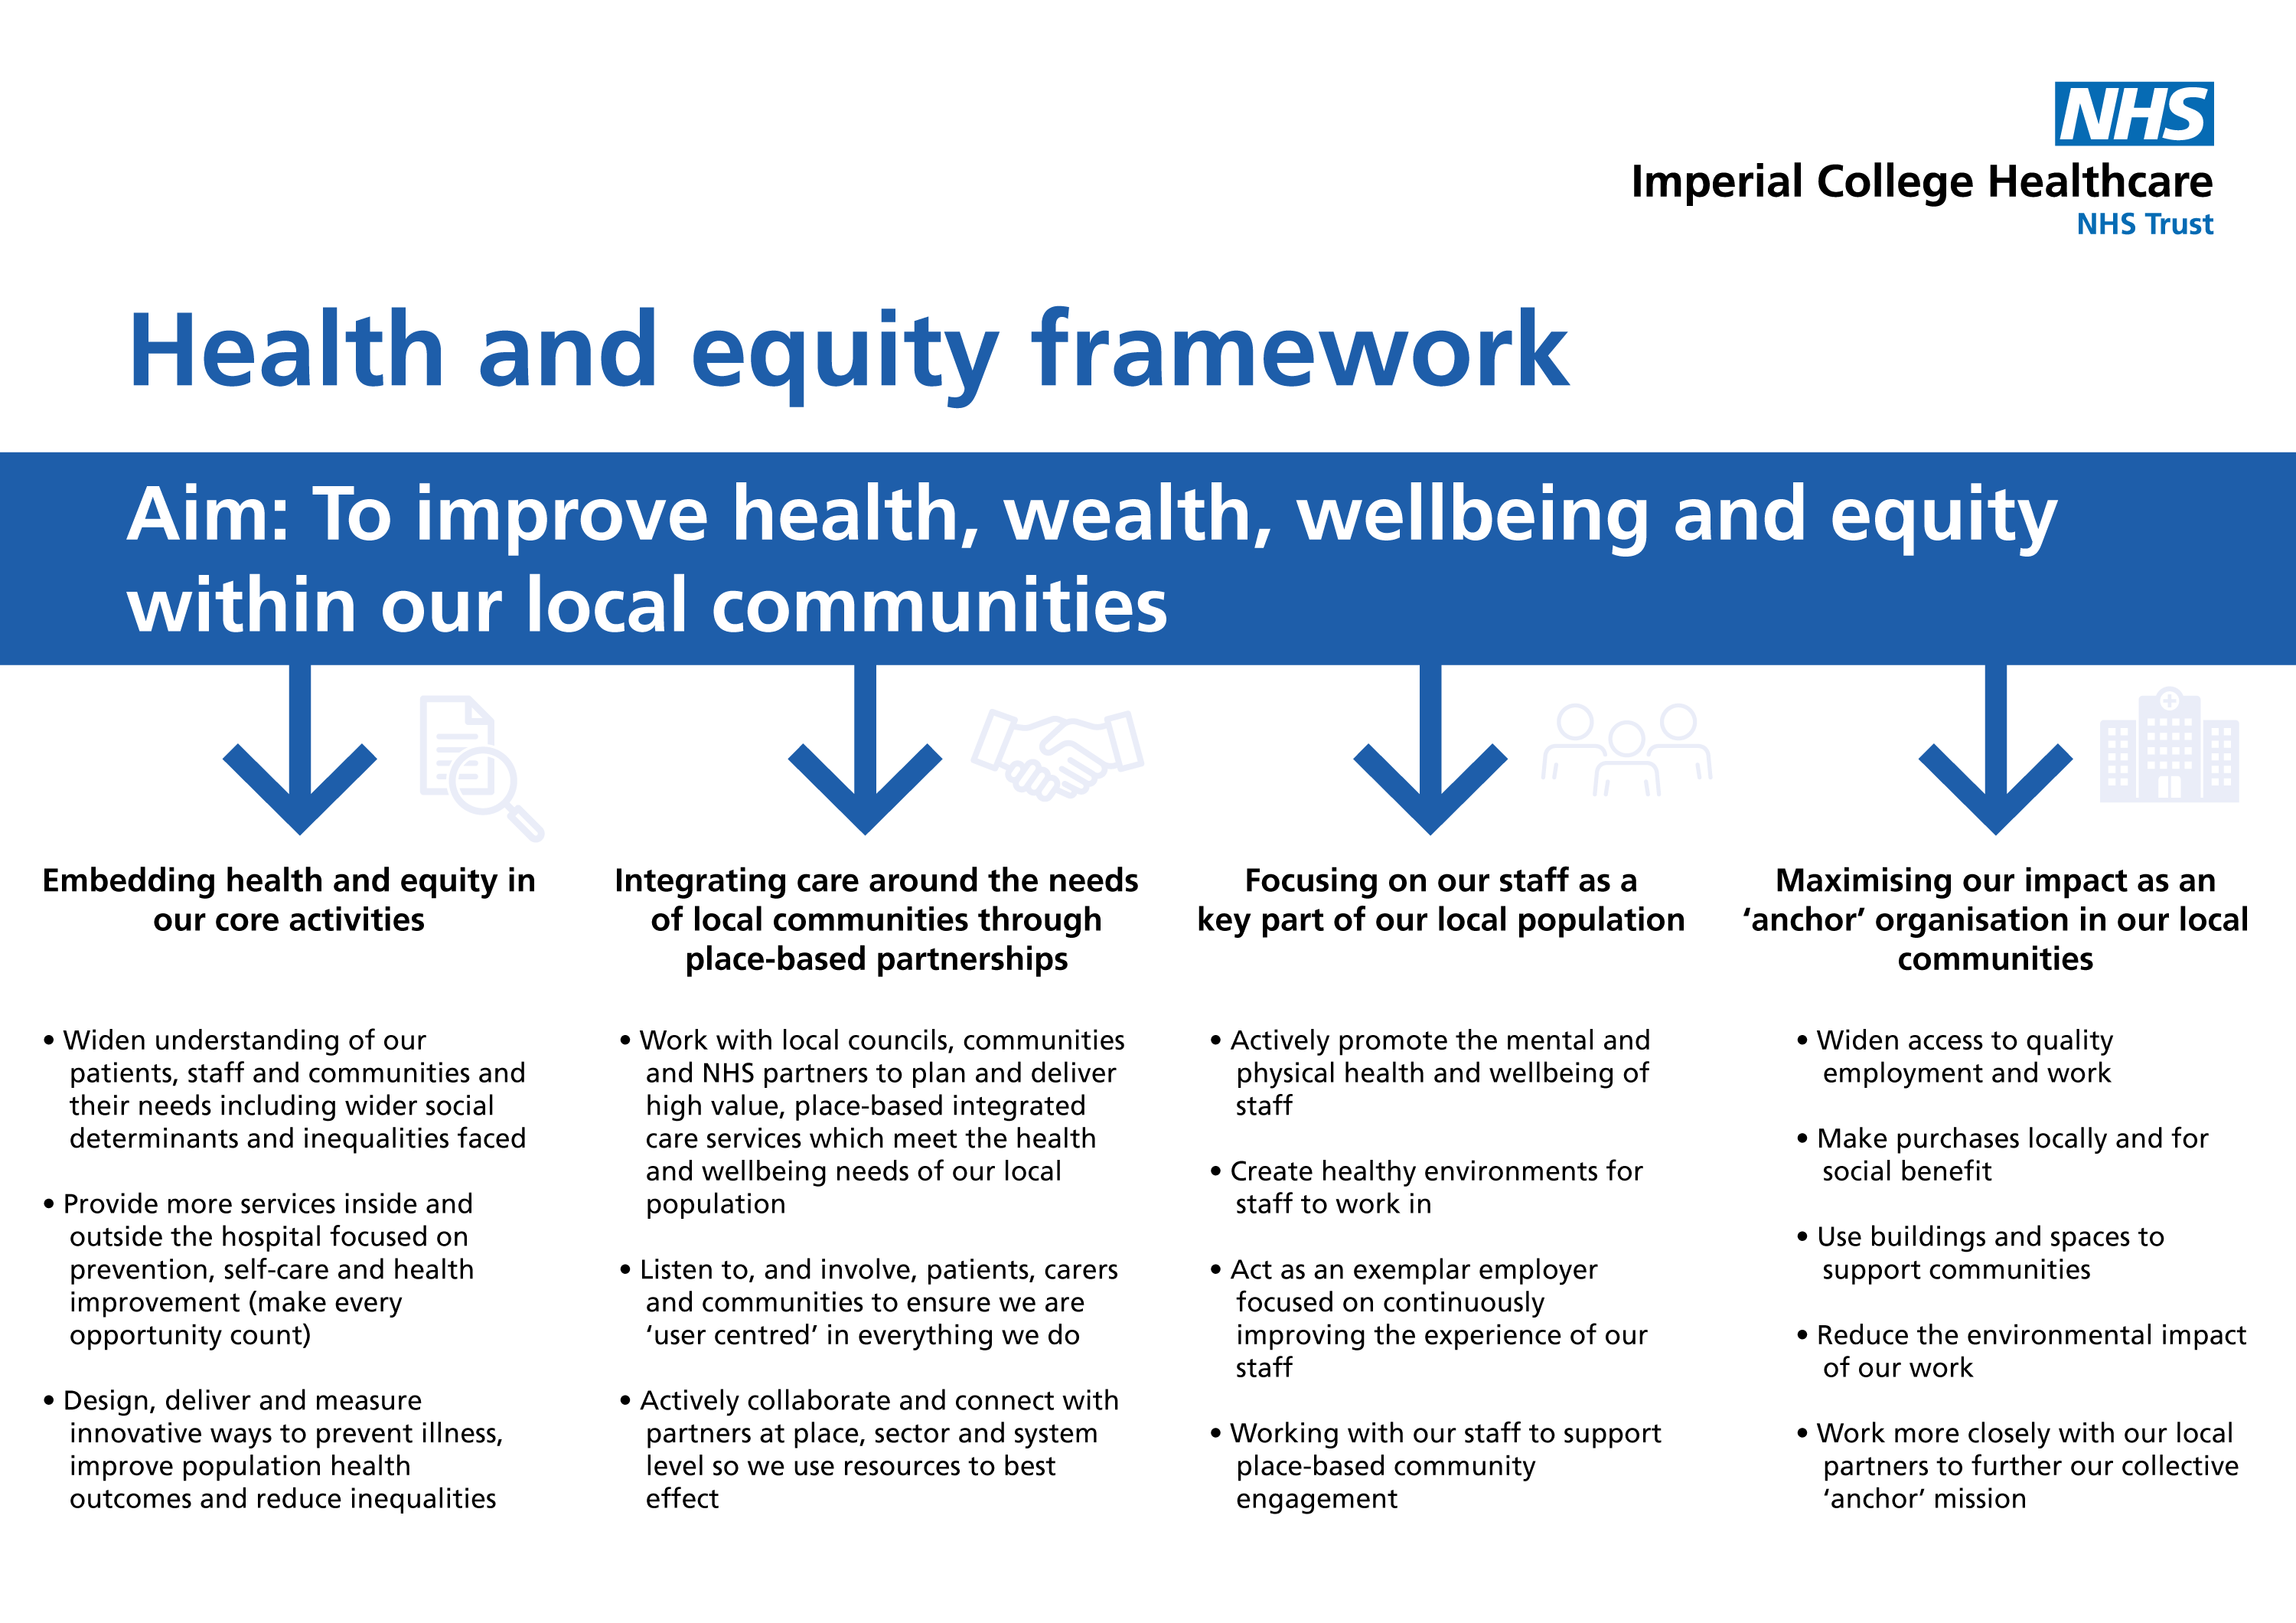 Health and equity framework for Imperial College Healthcare